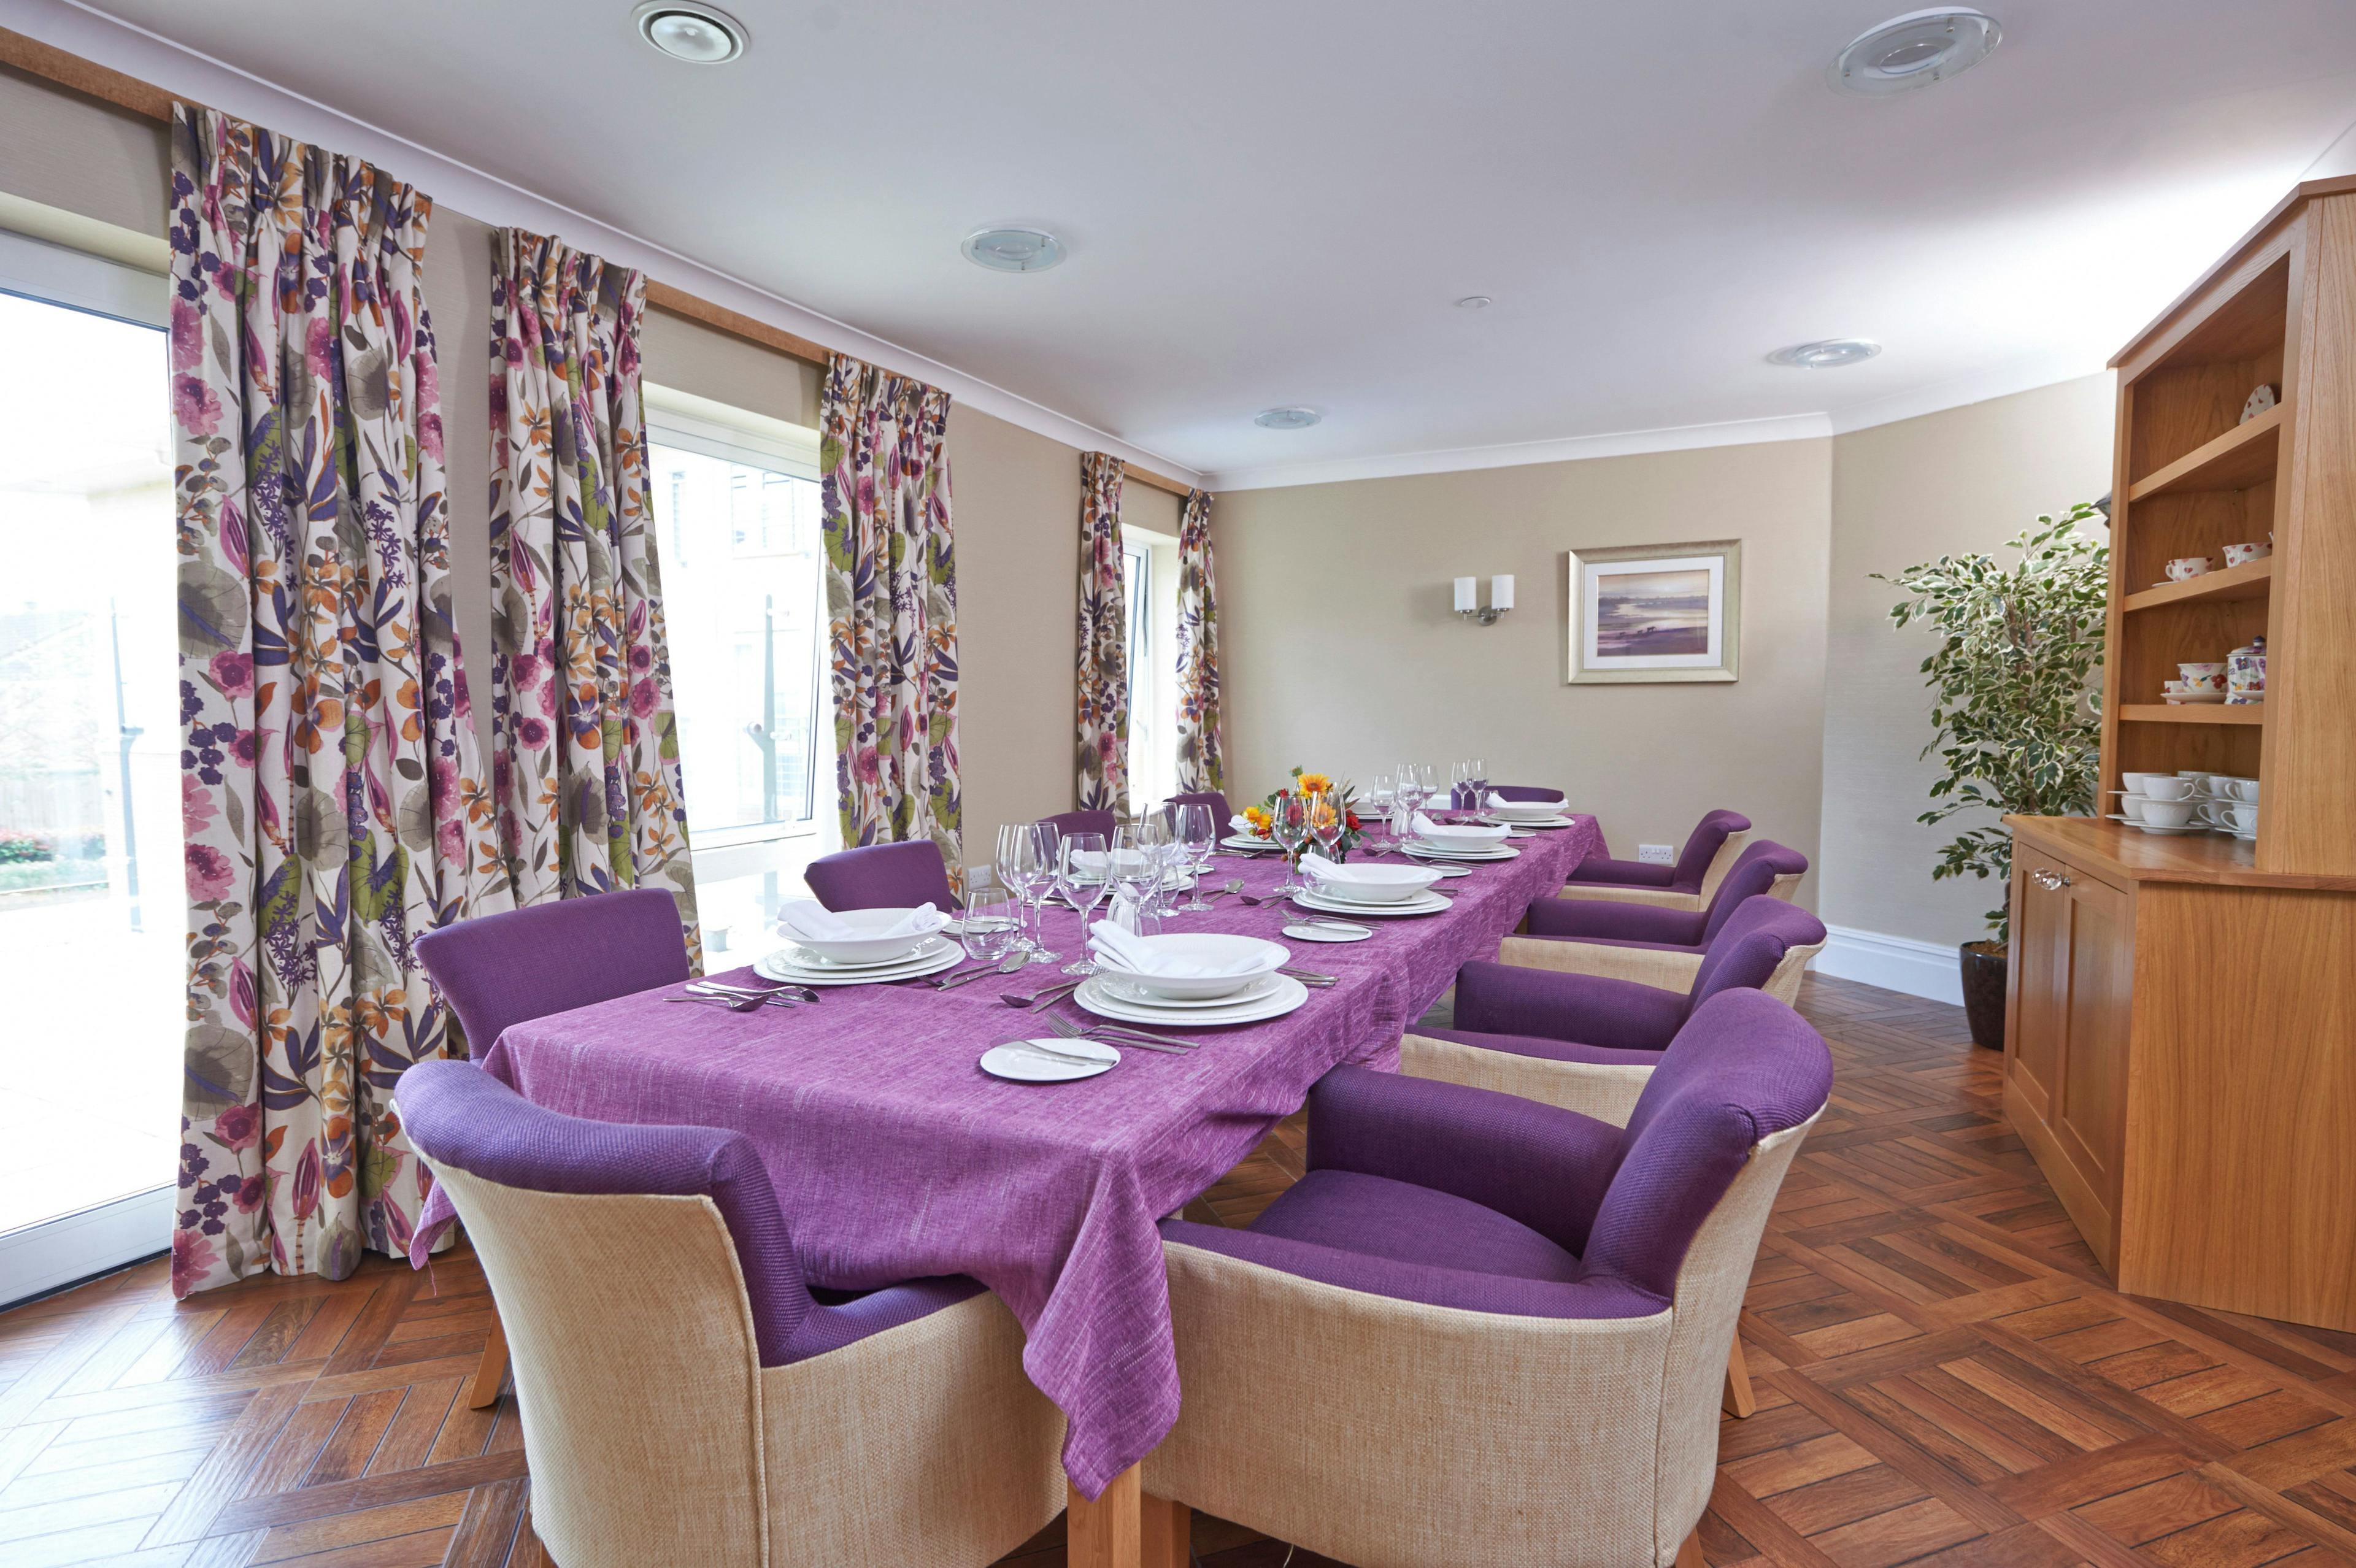 Porthaven Care Homes - Avondale care home 6